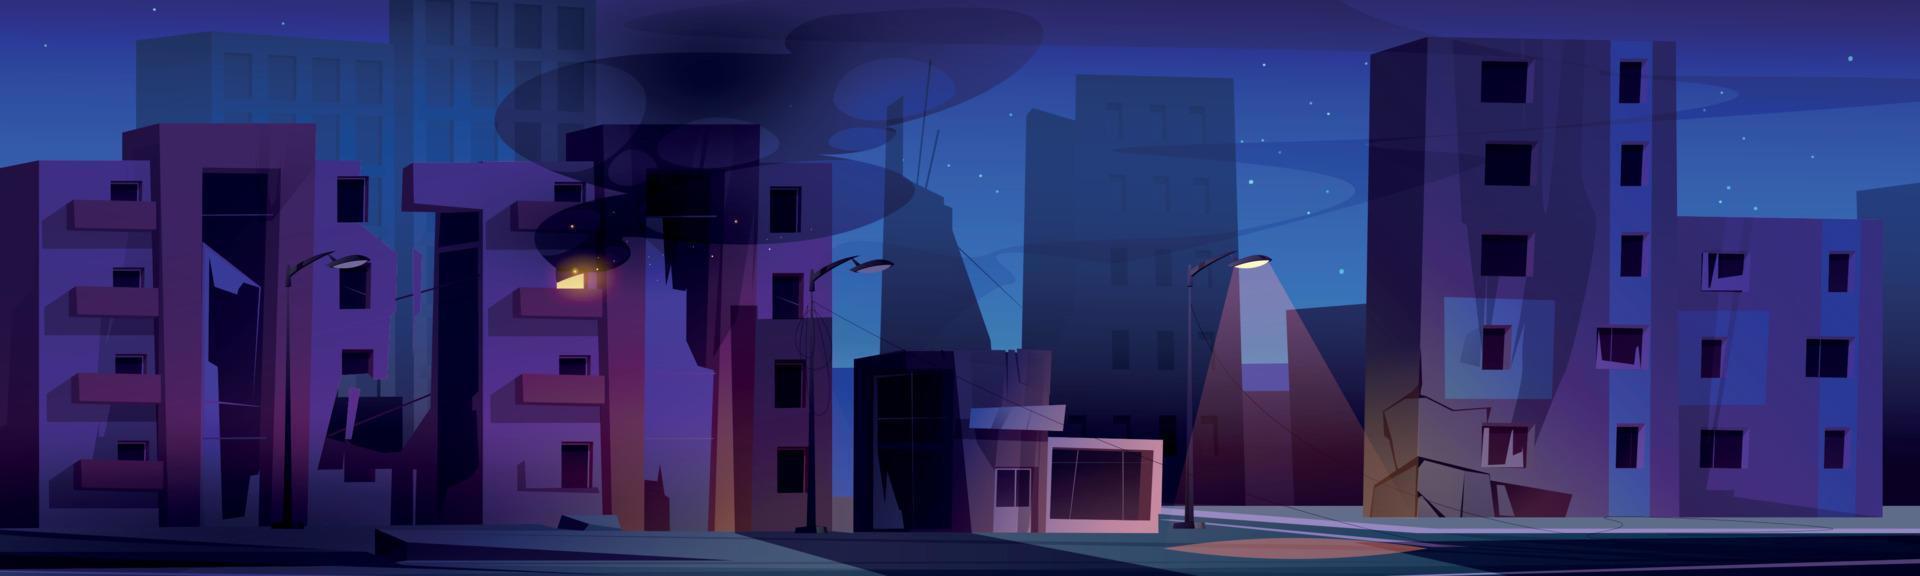 Destroyed city with broken houses at night vector